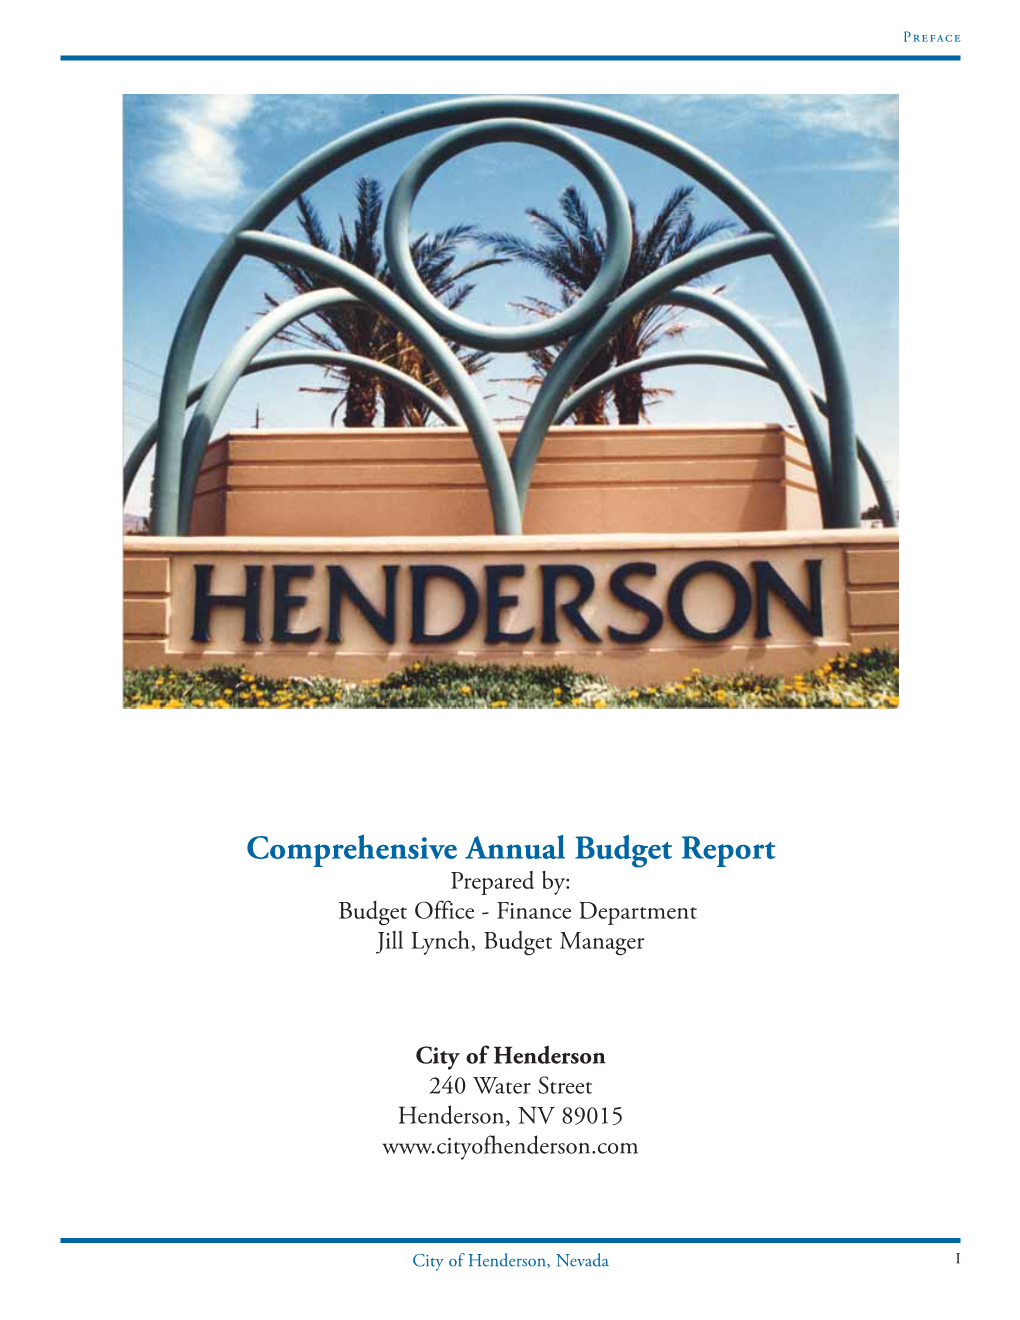 Comprehensive Annual Budget Report Prepared By: Budget Office - Finance Department Jill Lynch, Budget Manager